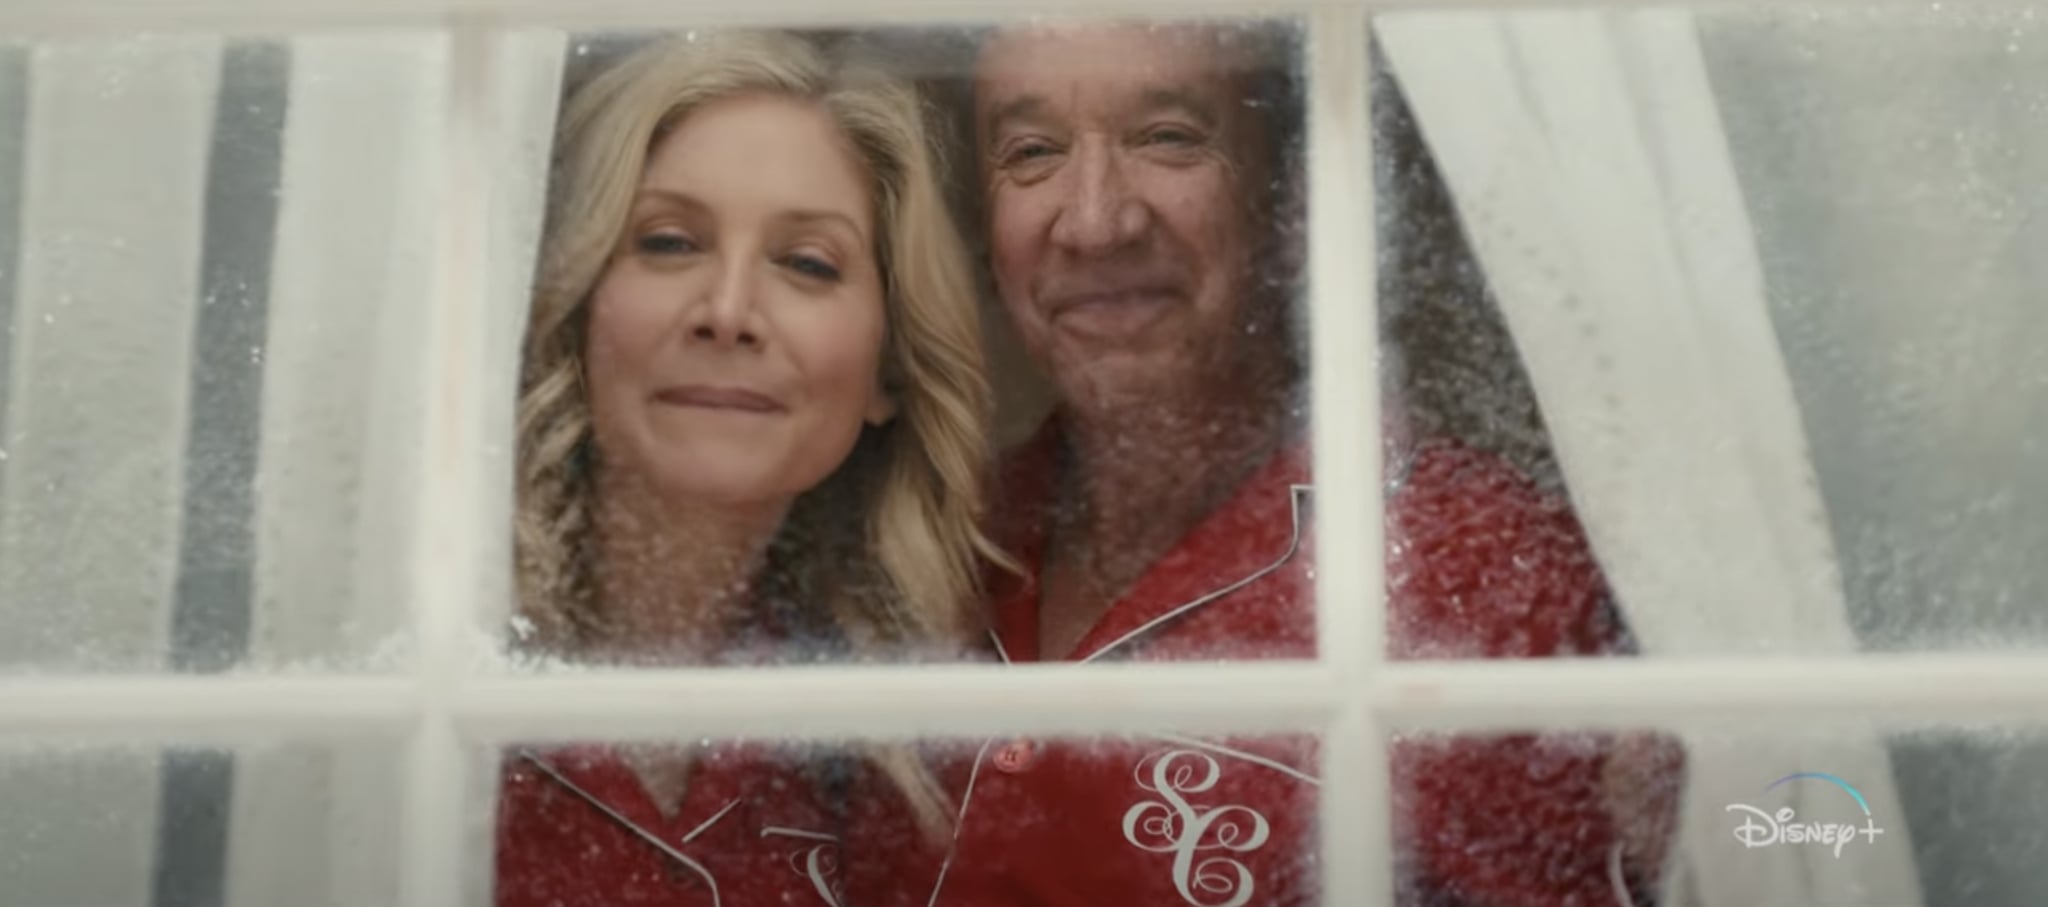 Tim Allen’s Santa Is Looking For a Successor in “The Santa Clauses” Trailer